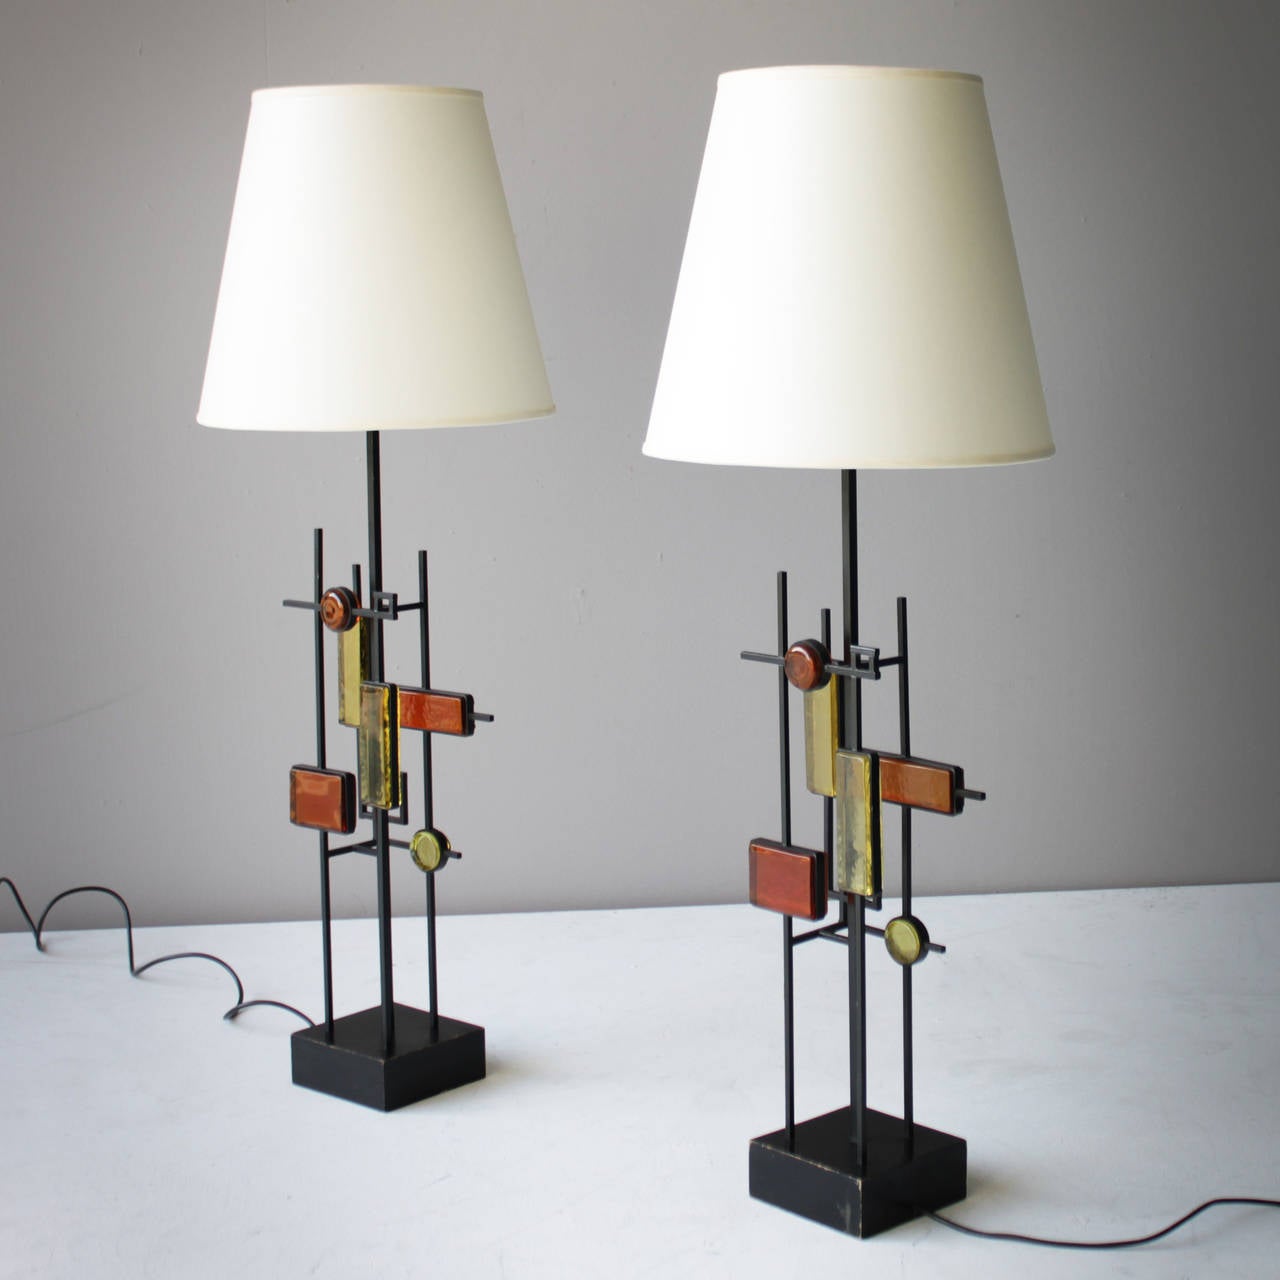 Glass Pair of Lamps by Svend Aage Holm Sorensen